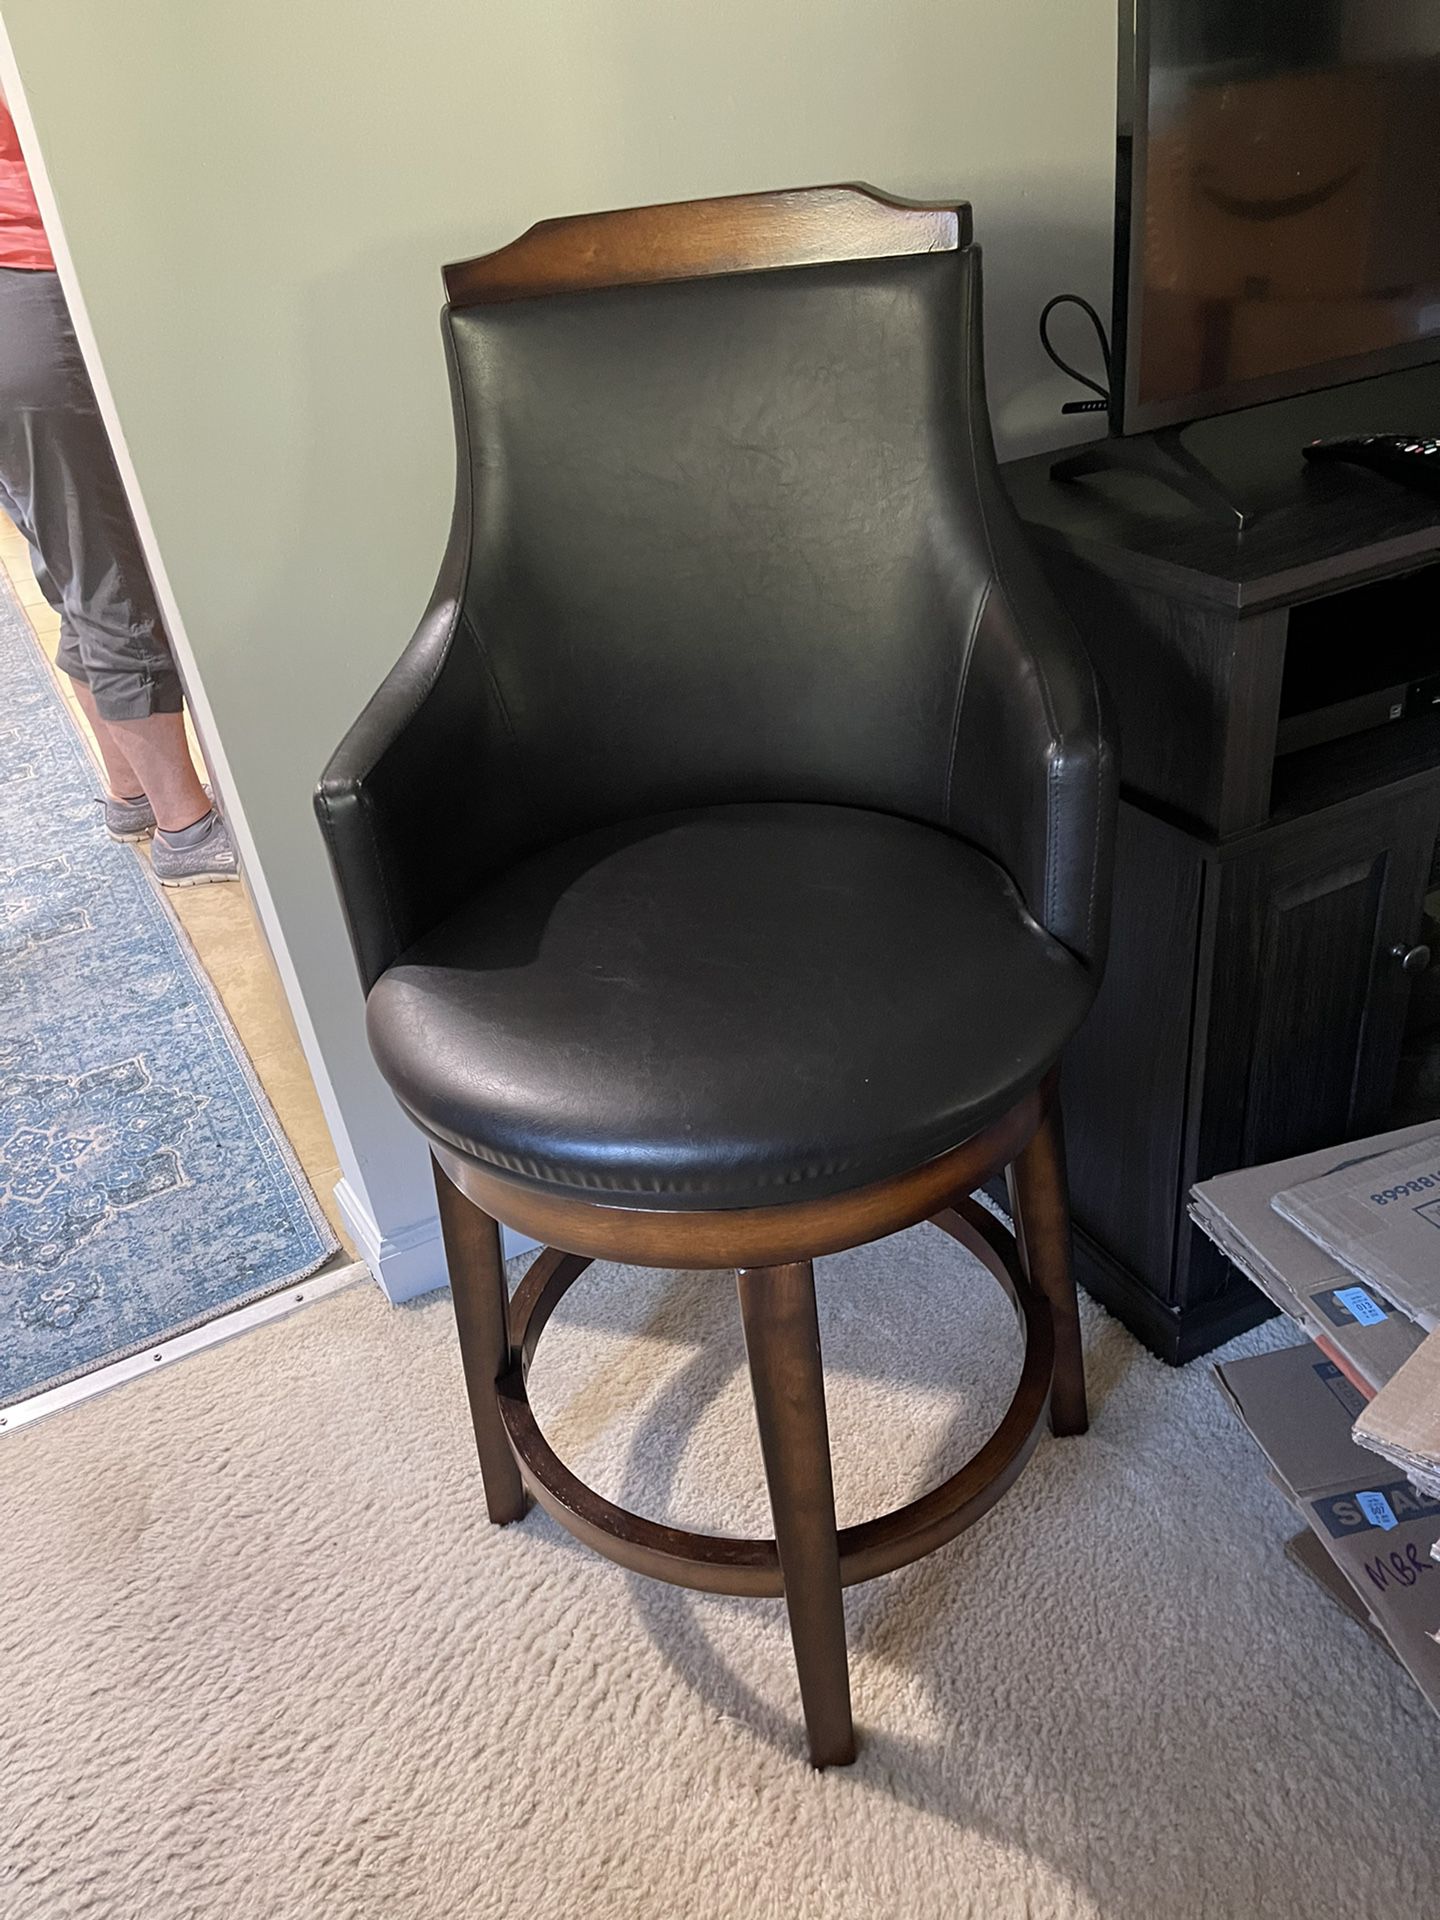 Two Counter Height Swivel Stools/Chairs